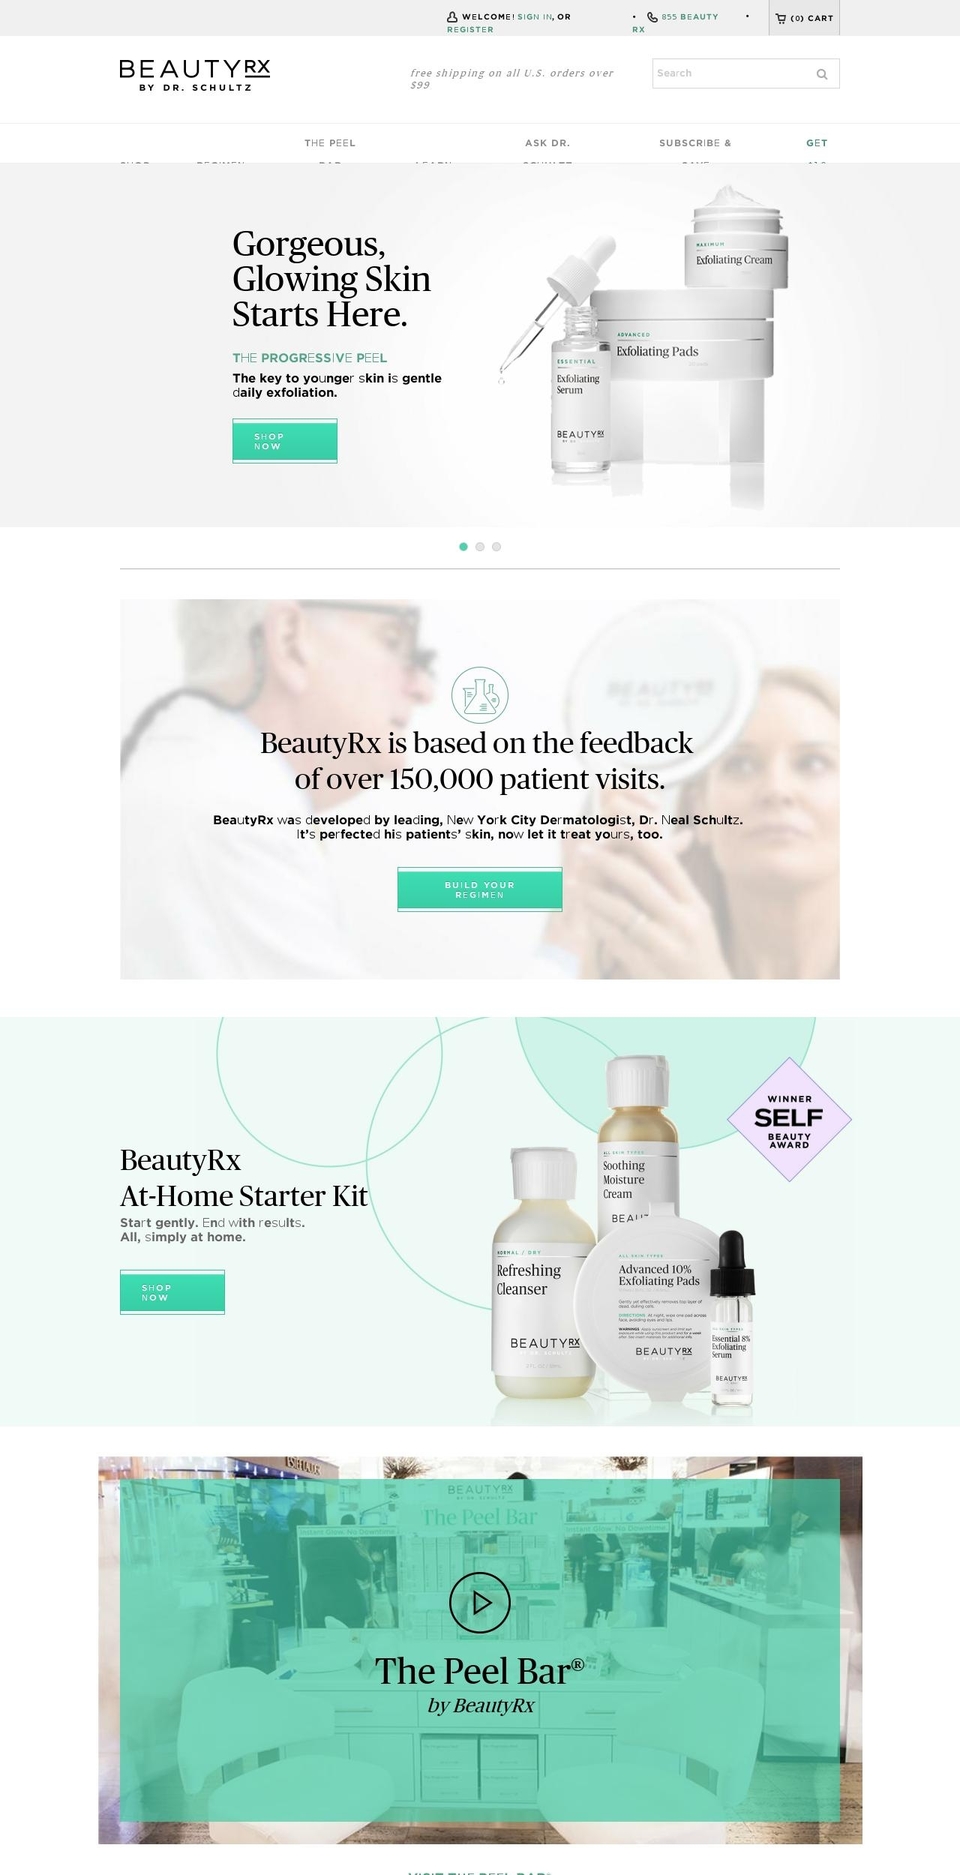 [Mob-20-Feb-18] Beauty RX [BR-248] Shopify theme site example beautyrxskincare.info